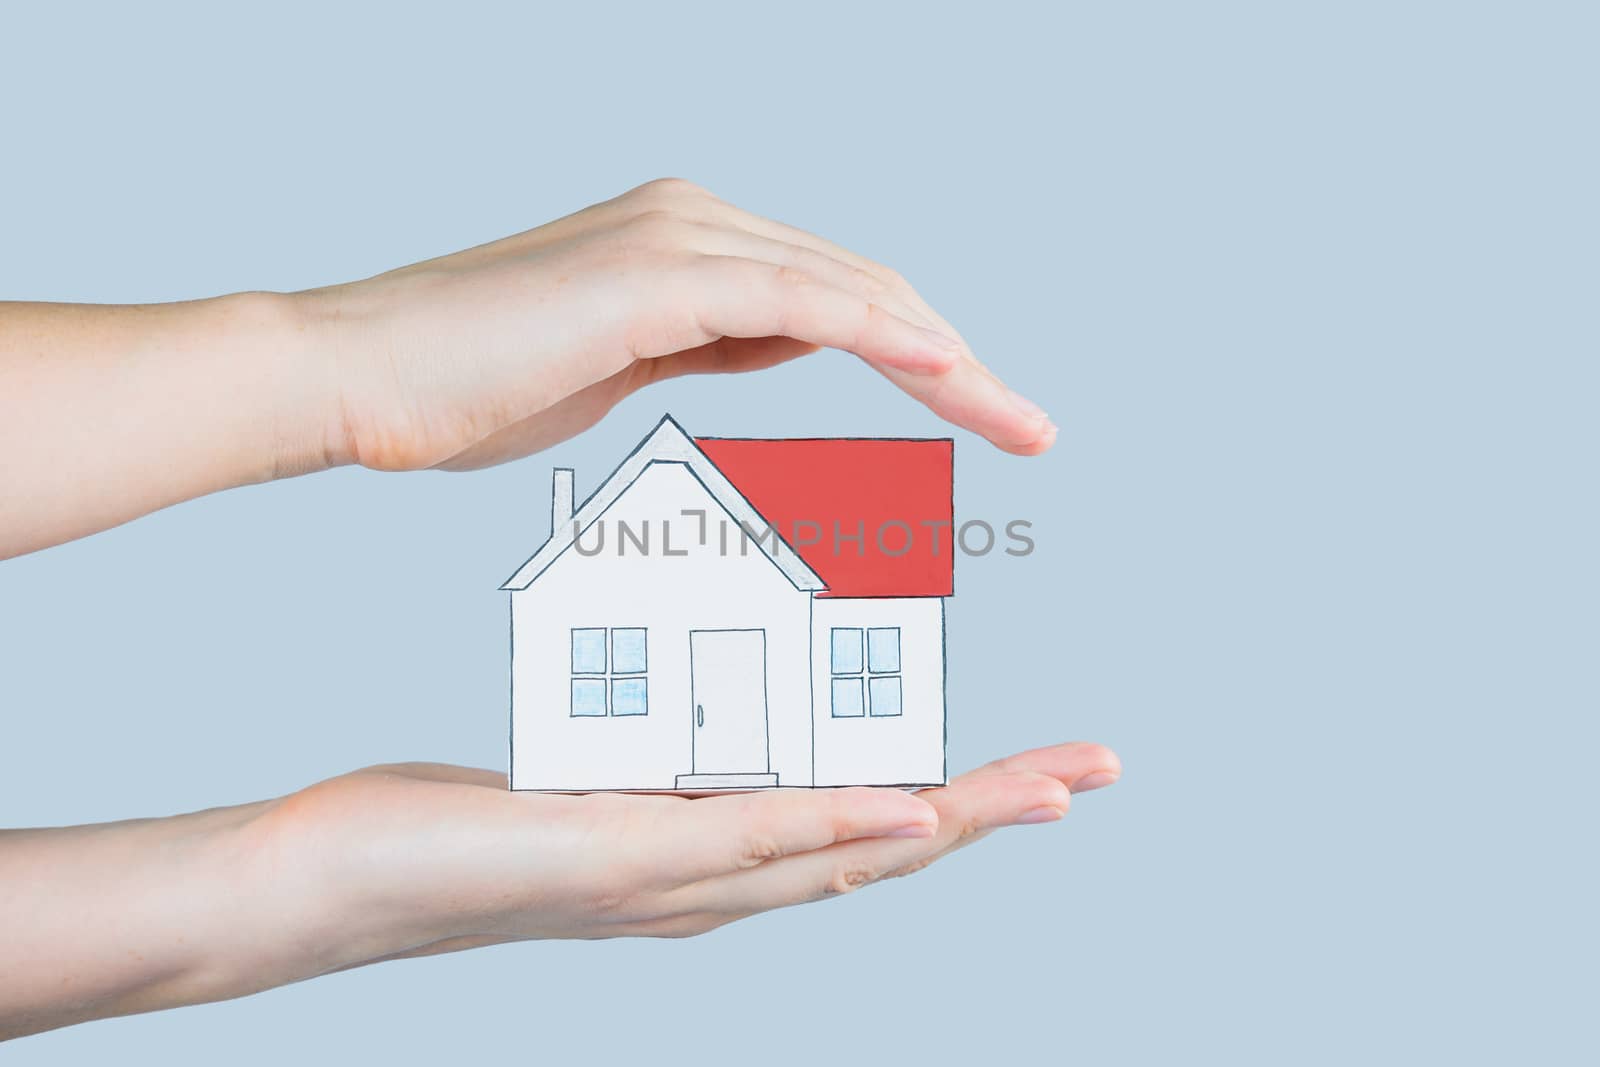 The figure of a house in human hands. Hands hold and gently cover a figure of home - concept of home insurance, safety, family planning, mortgage and safe house